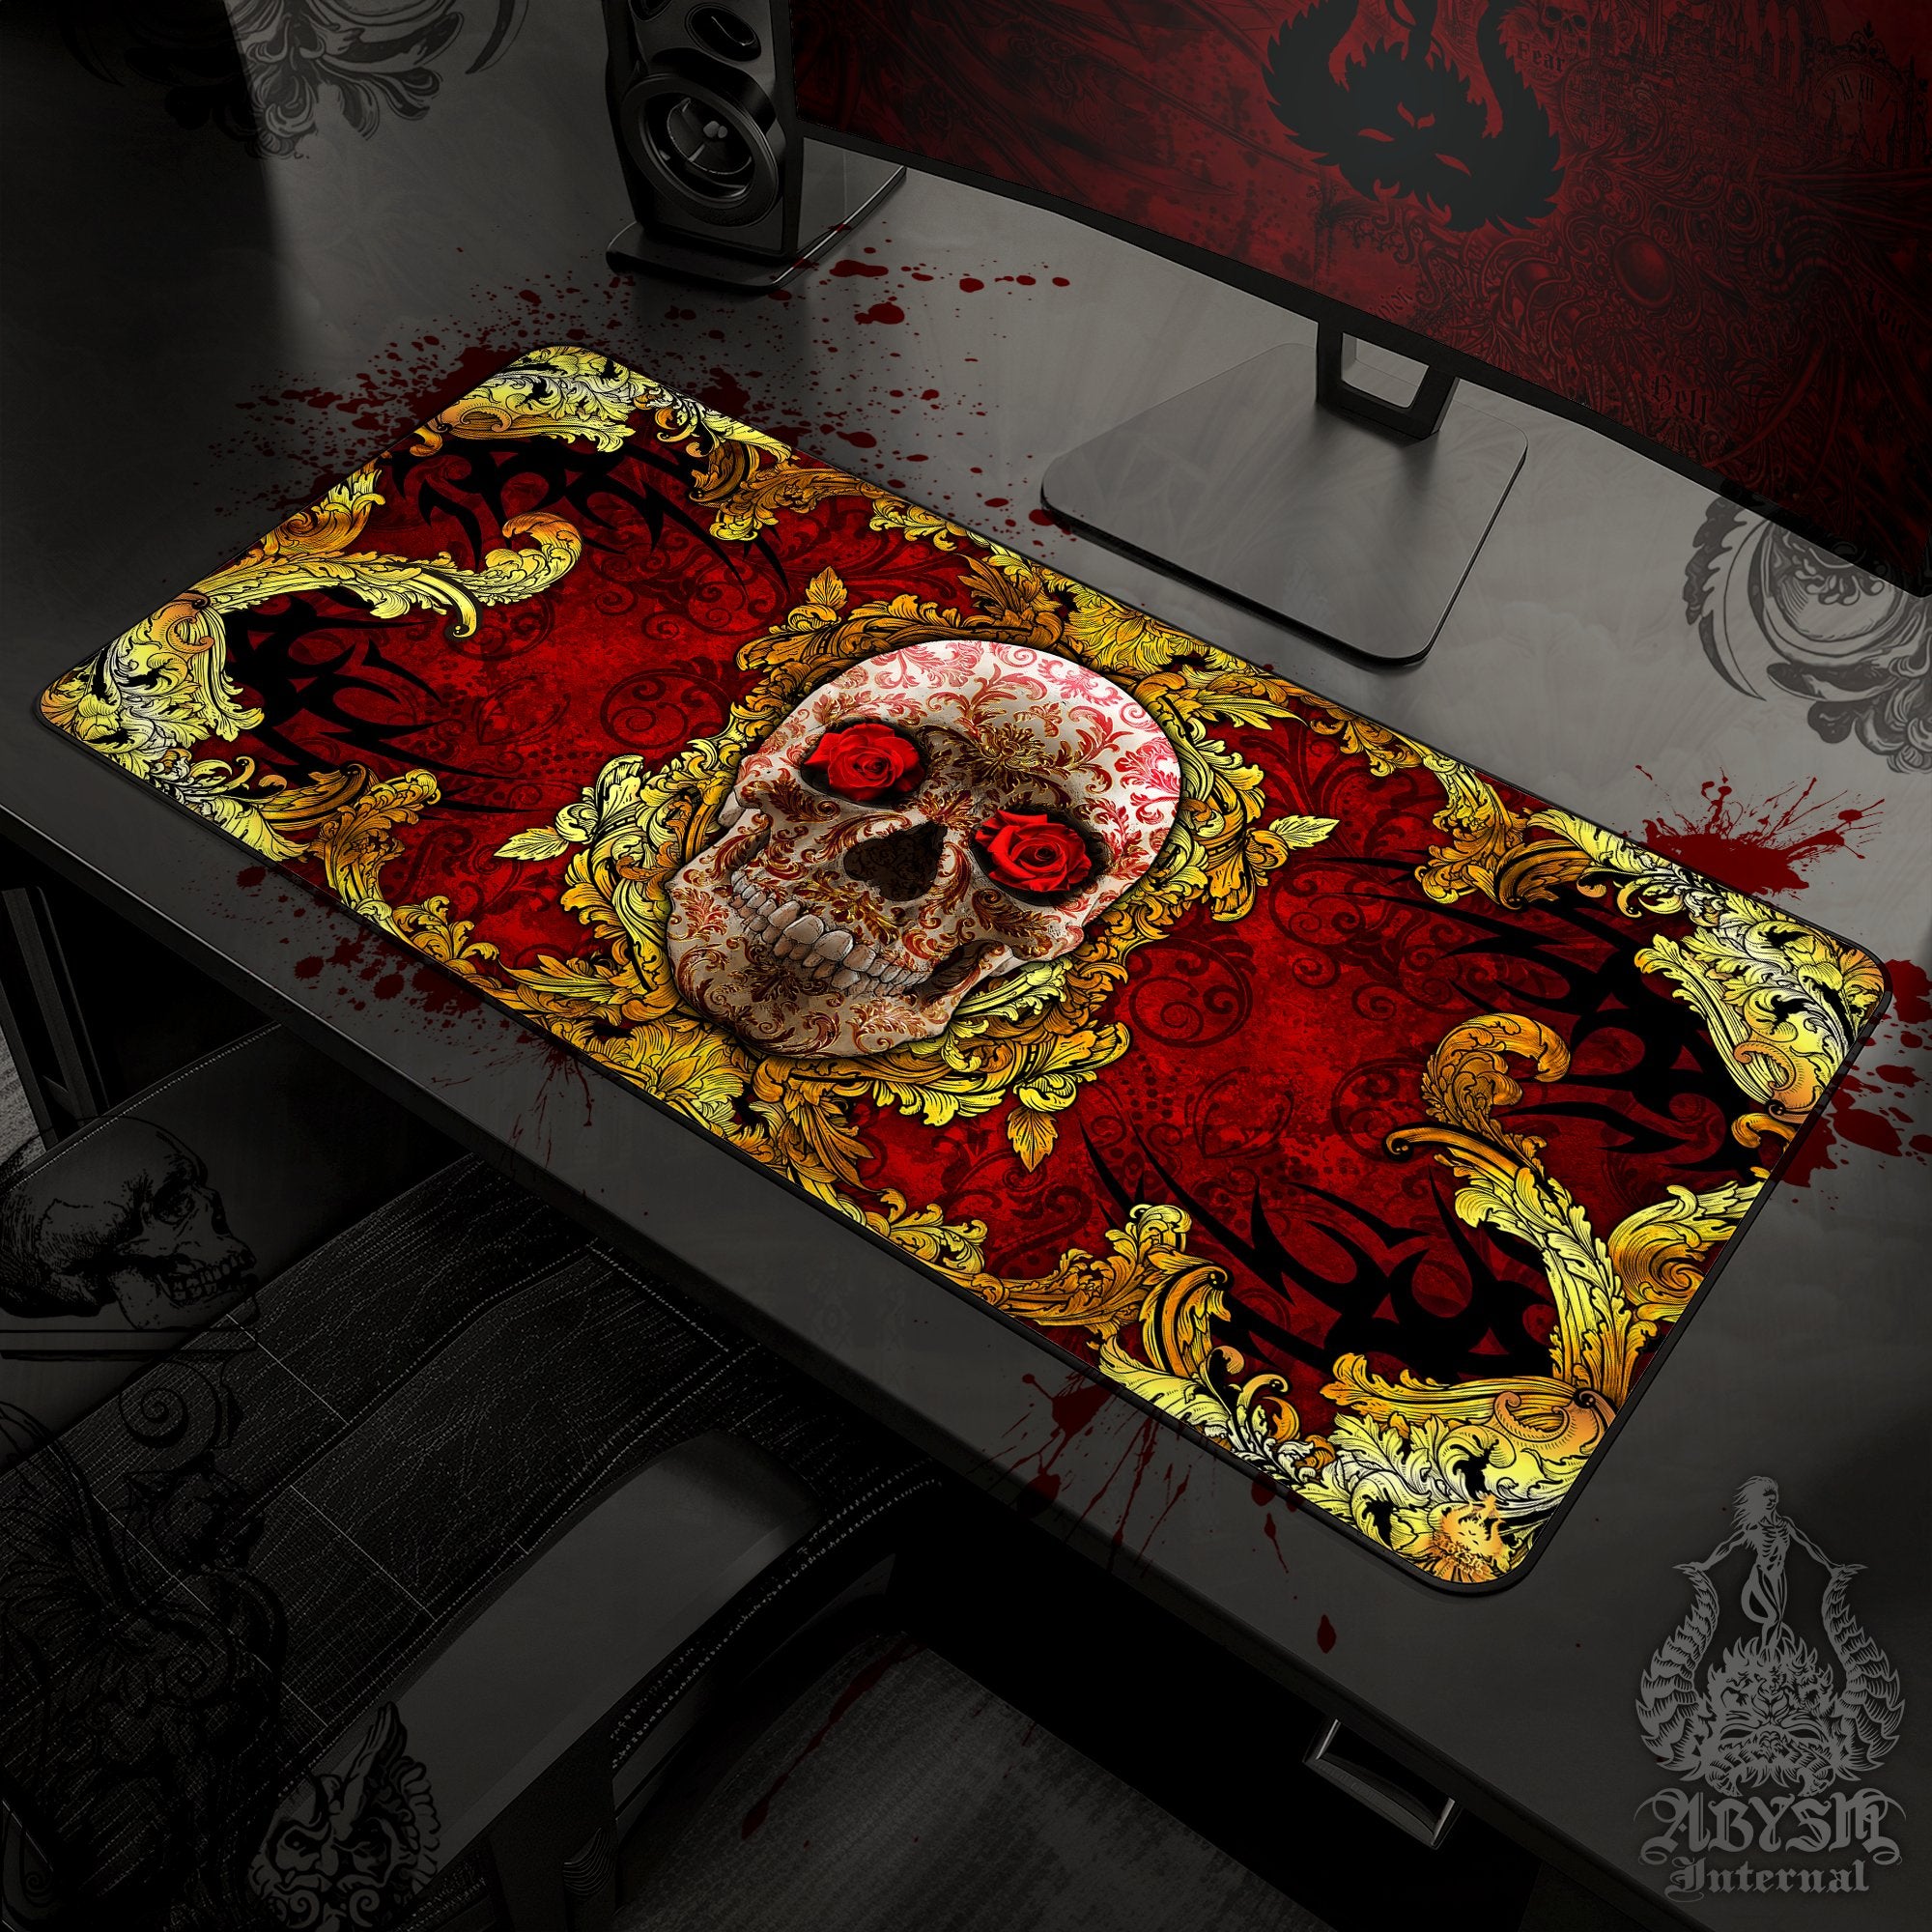 Gold Skull Desk Mat, Ornamented Gaming Mouse Pad, Vintage Table Protector Cover, Baroque Workpad, Art Print - Red - Abysm Internal